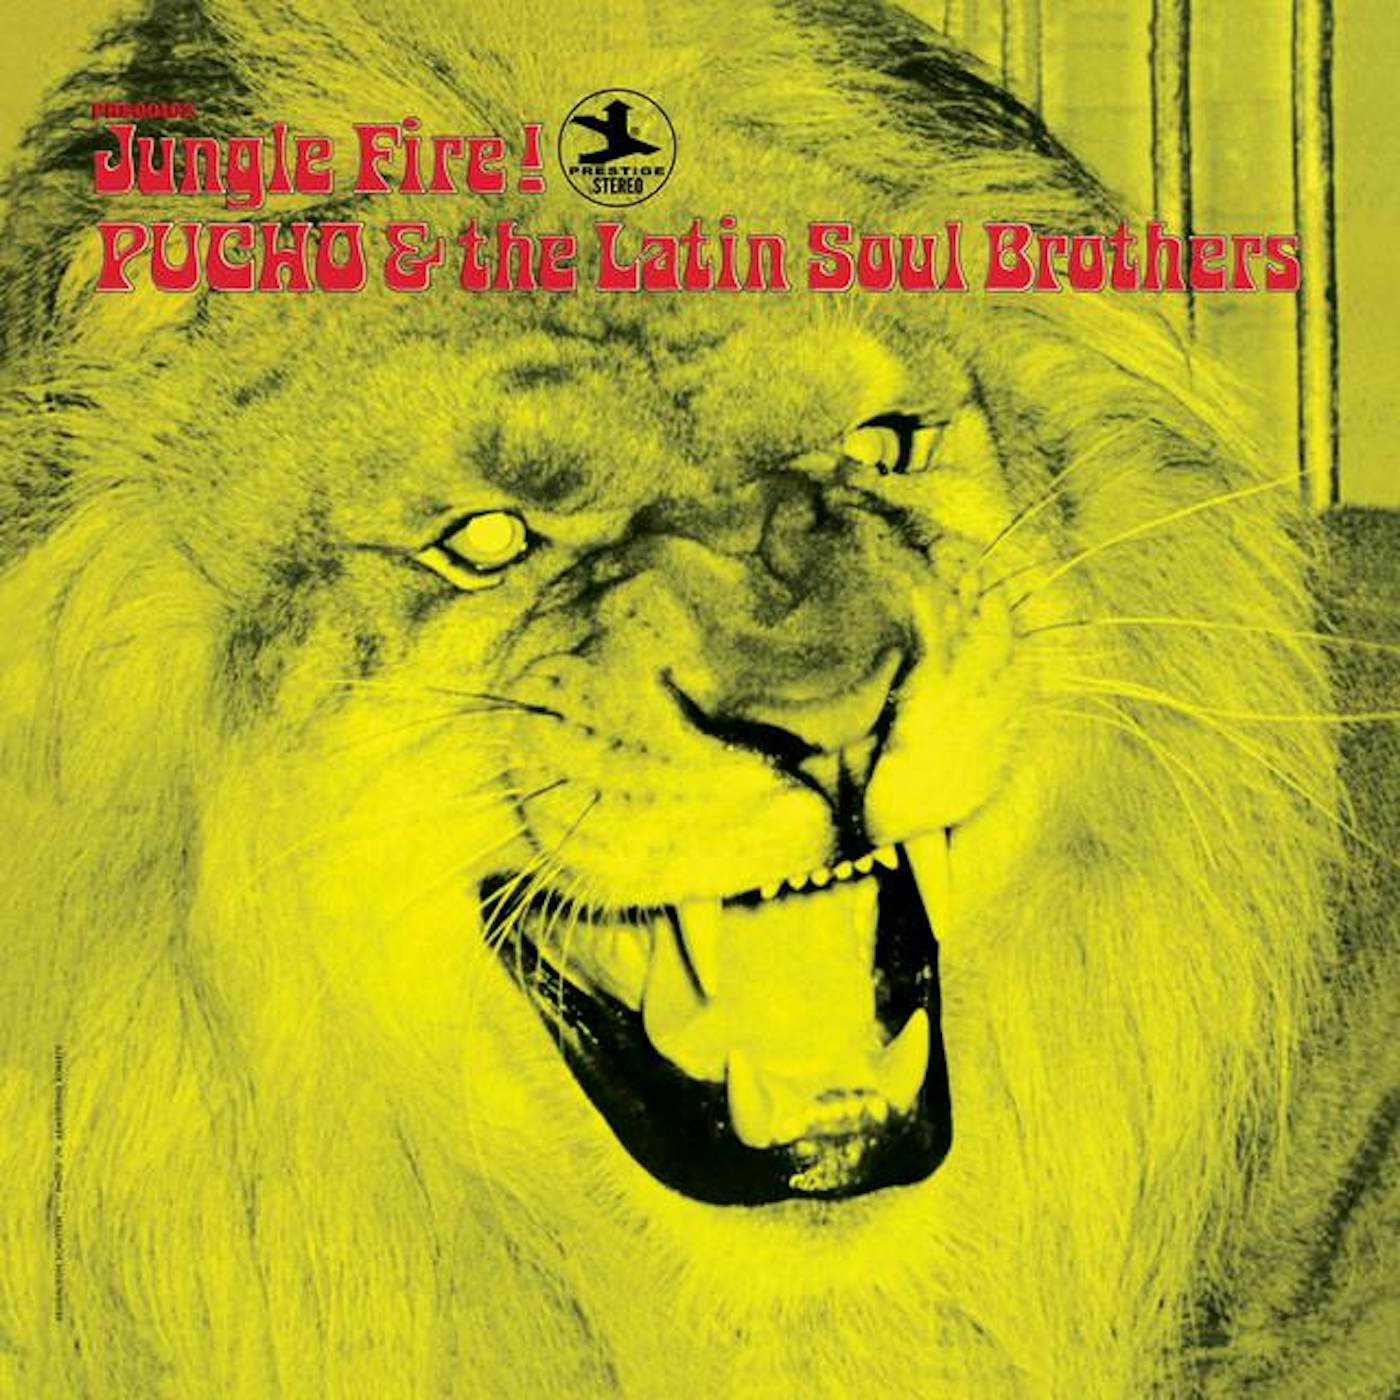 Pucho & The Latin Soul Brothers